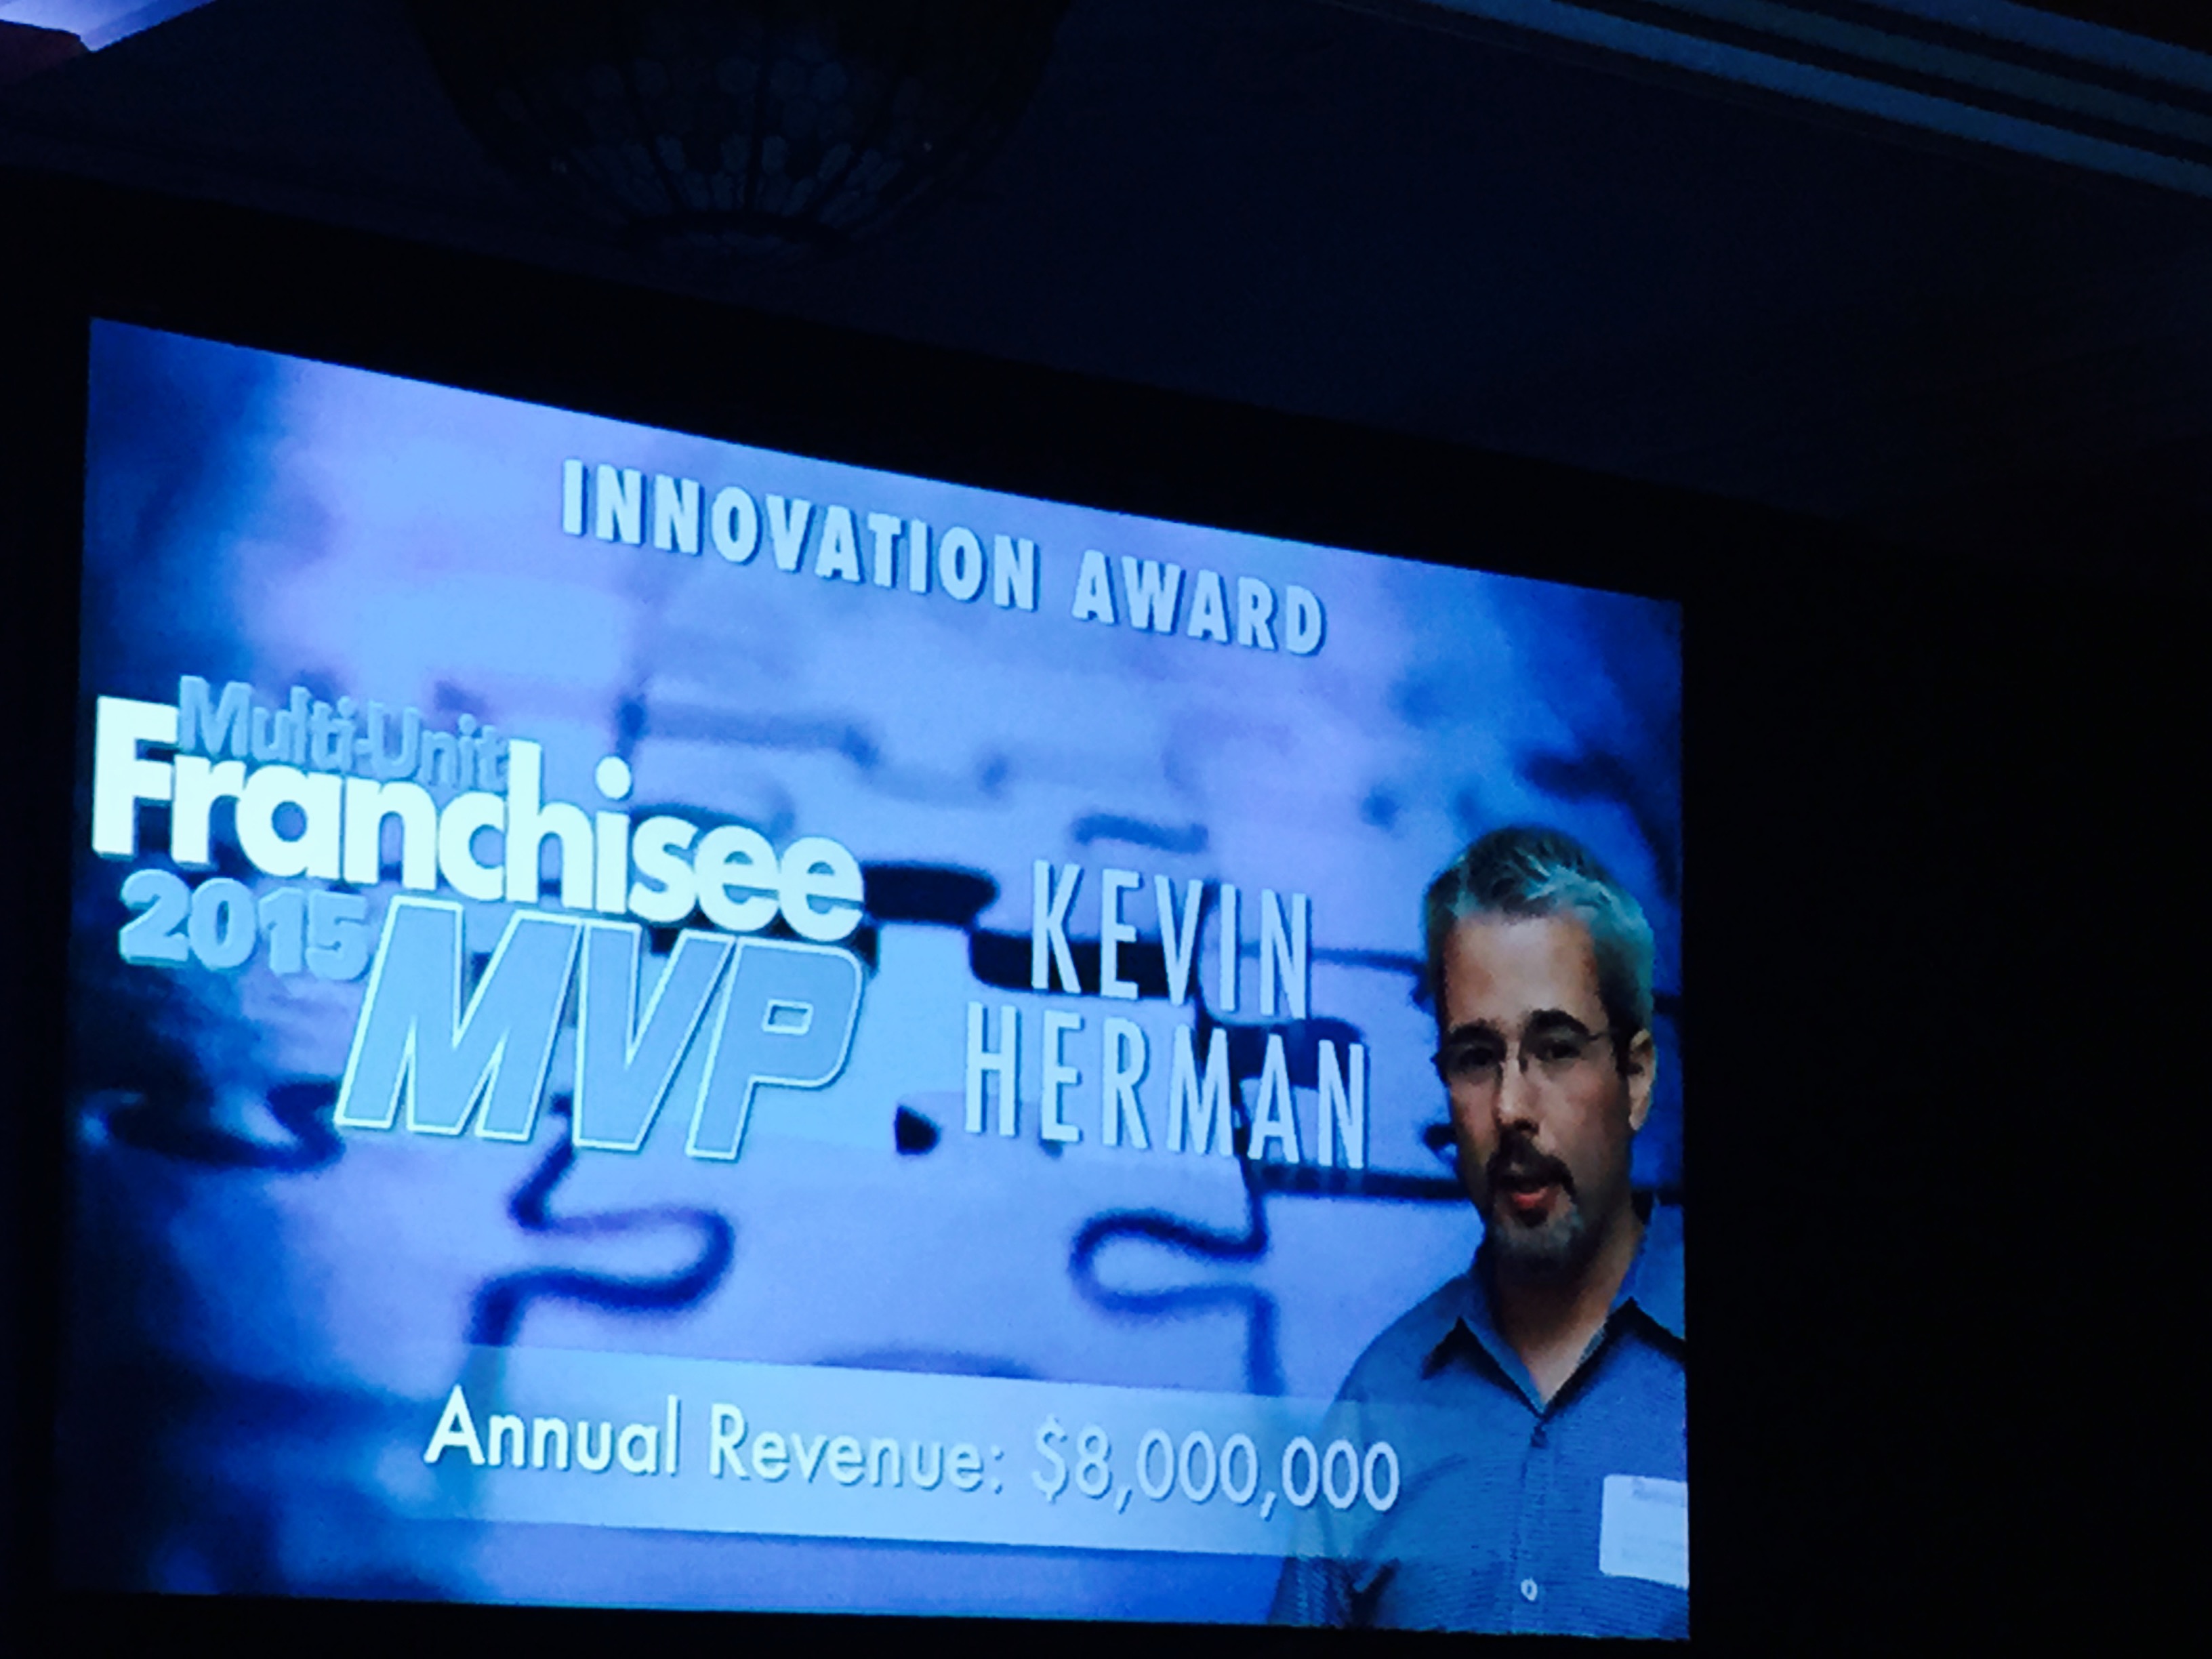 Senior Helpers® was honored with the Multi-Unit Franchisee MVP Award for Innovation.